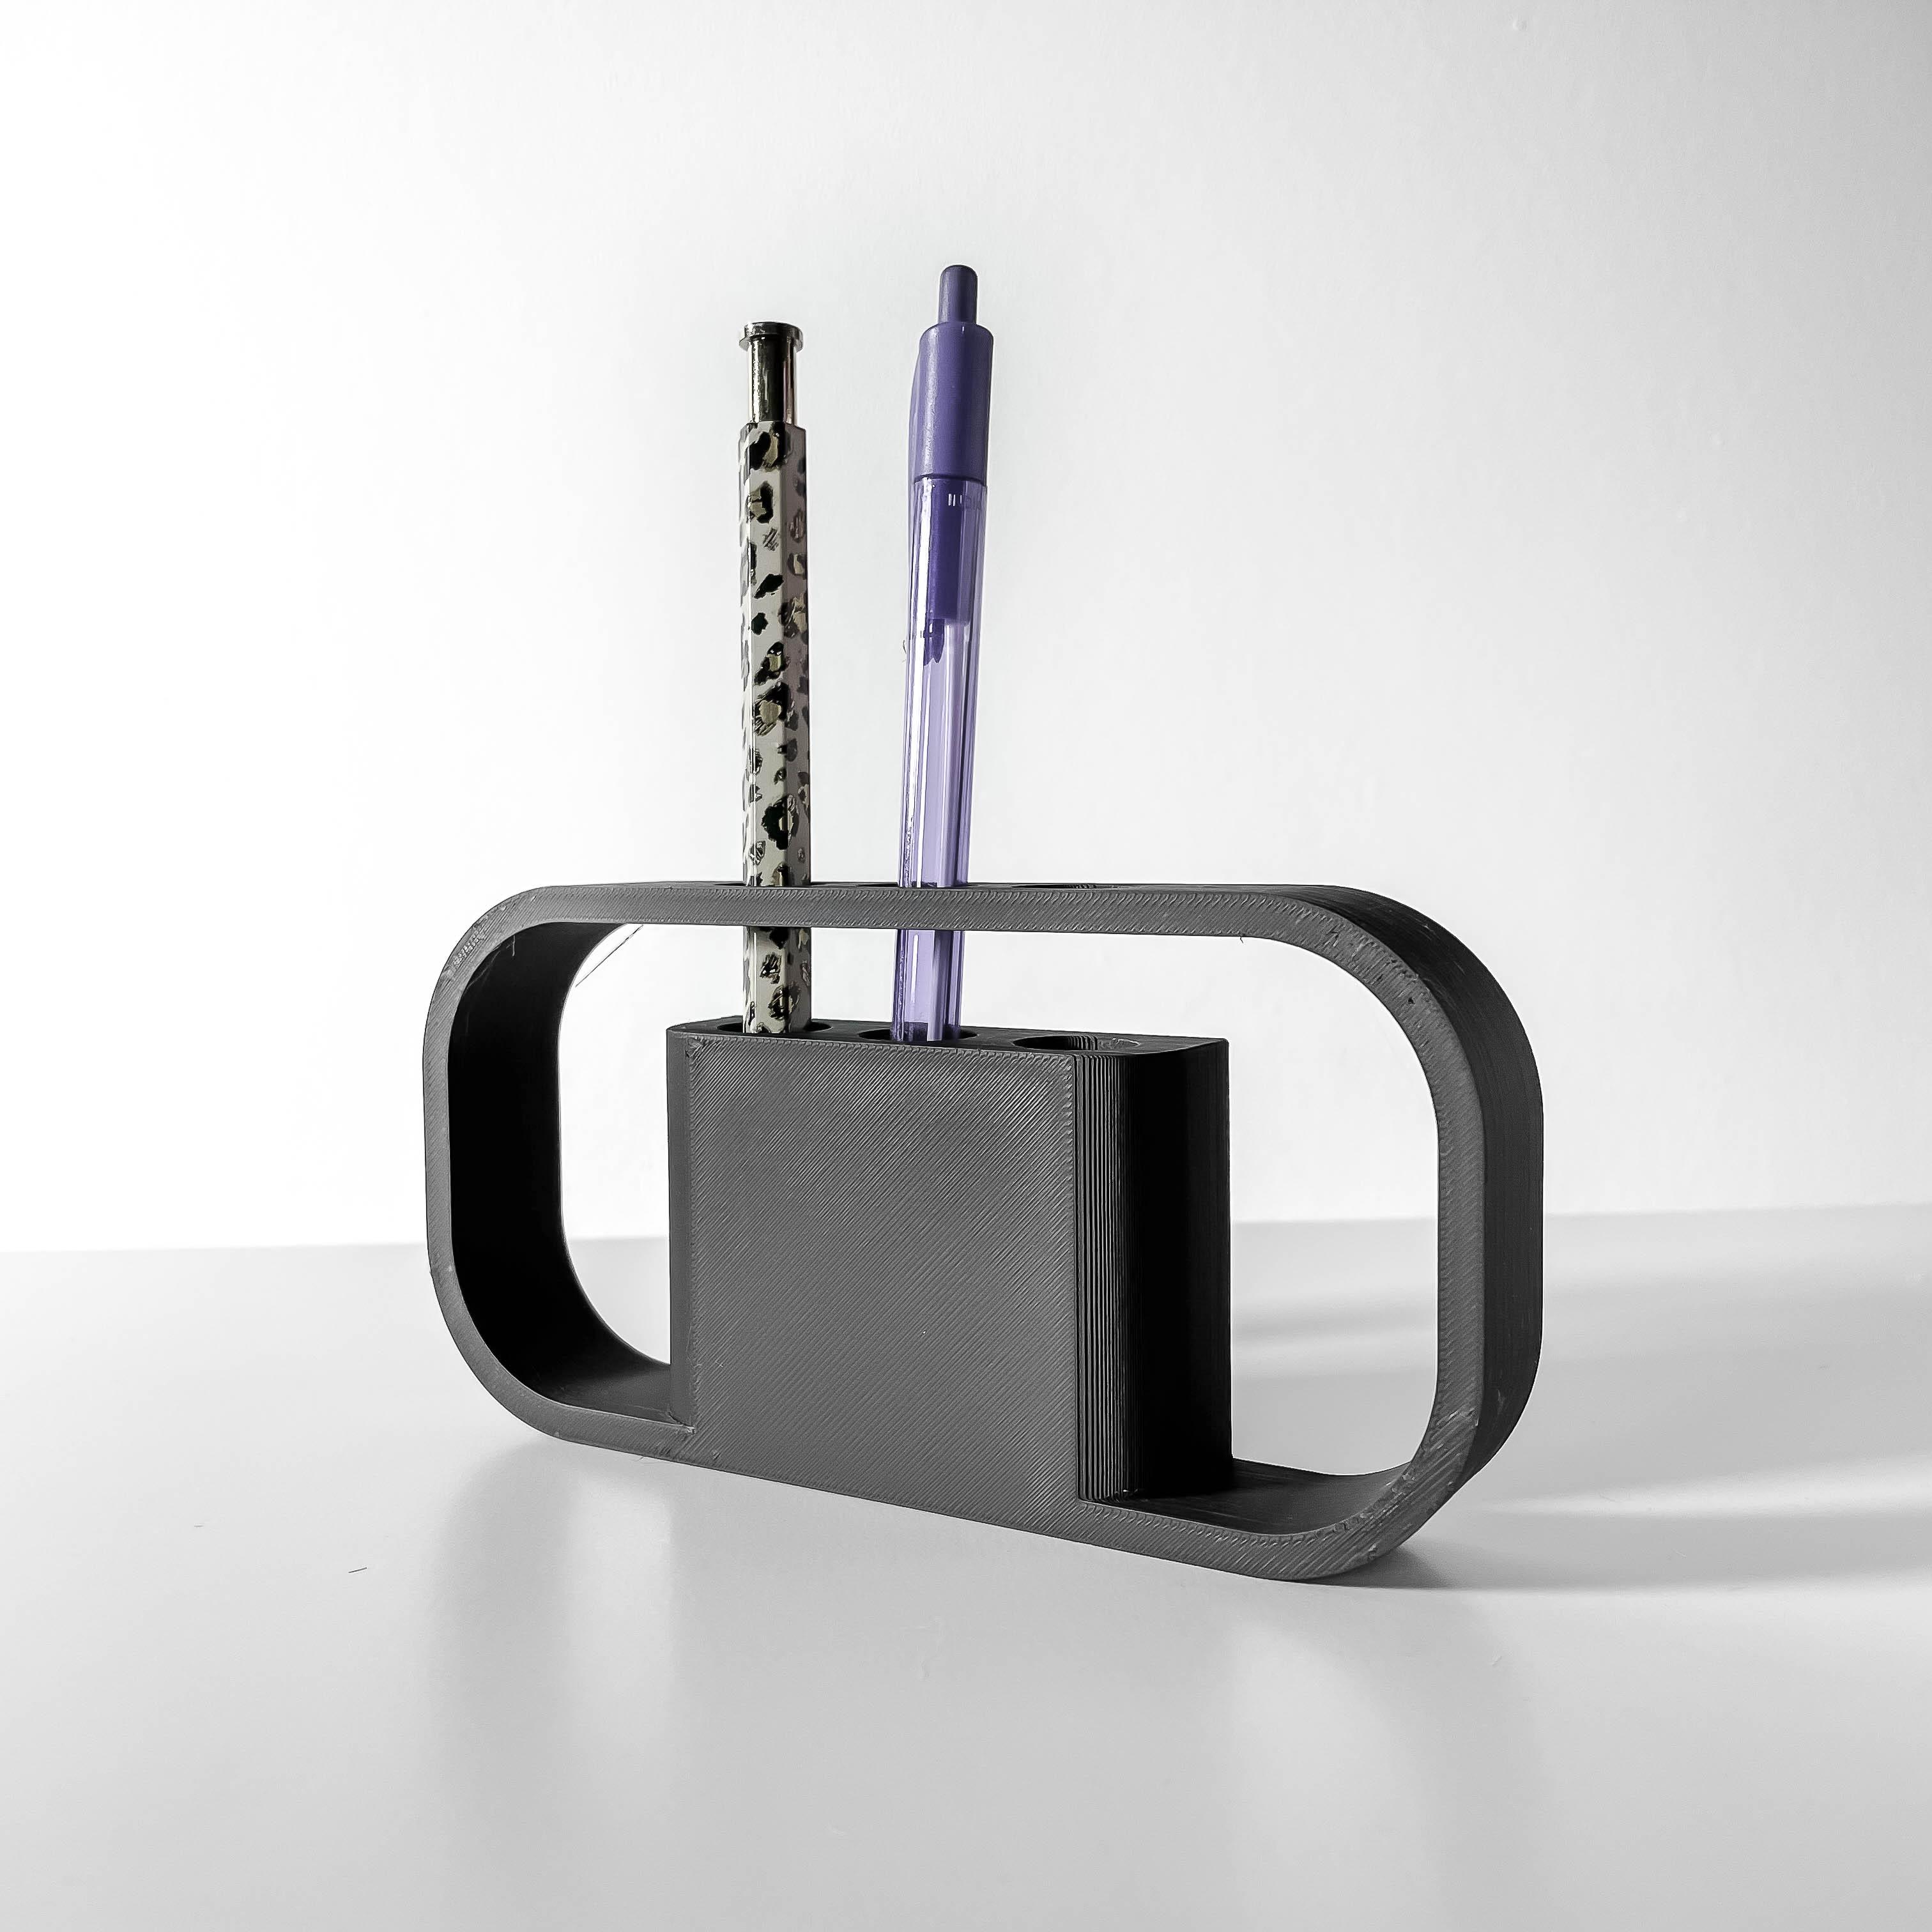 The Ilios Pen Holder | Desk Organizer and Pencil Cup Holder | Modern Office and Home Decor 3d model